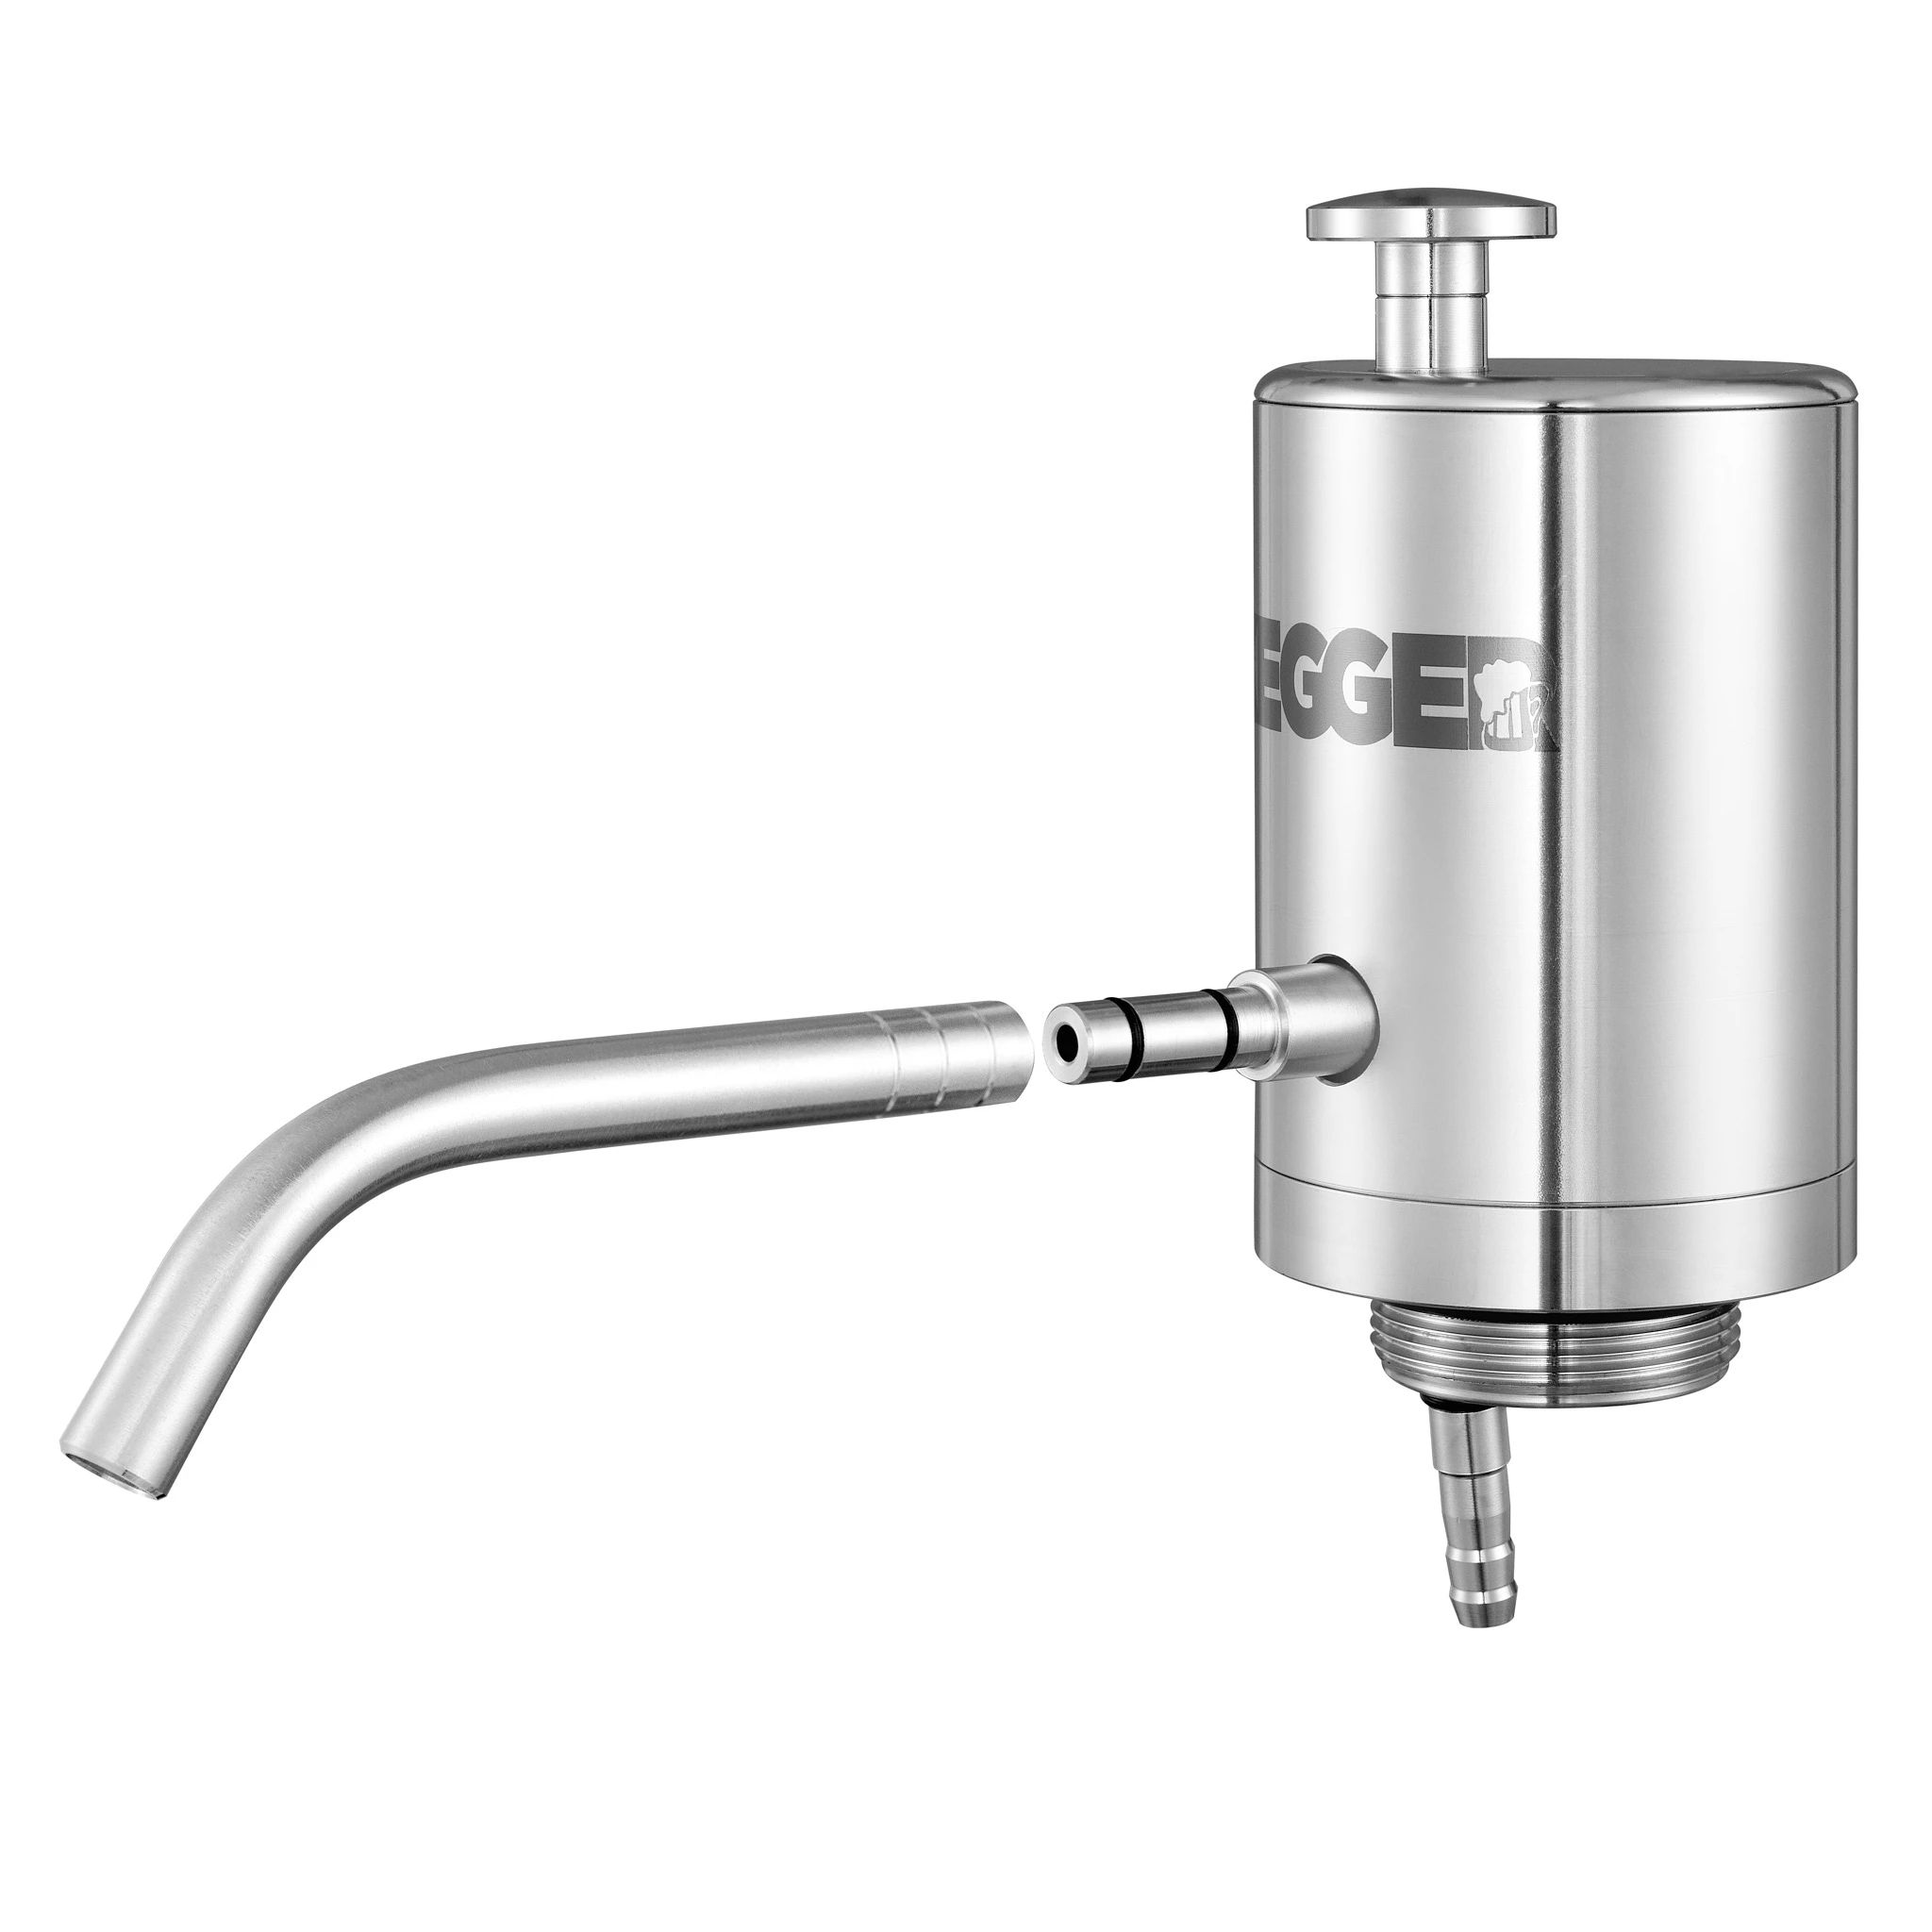 a keger beer dispenser on a white background product photography